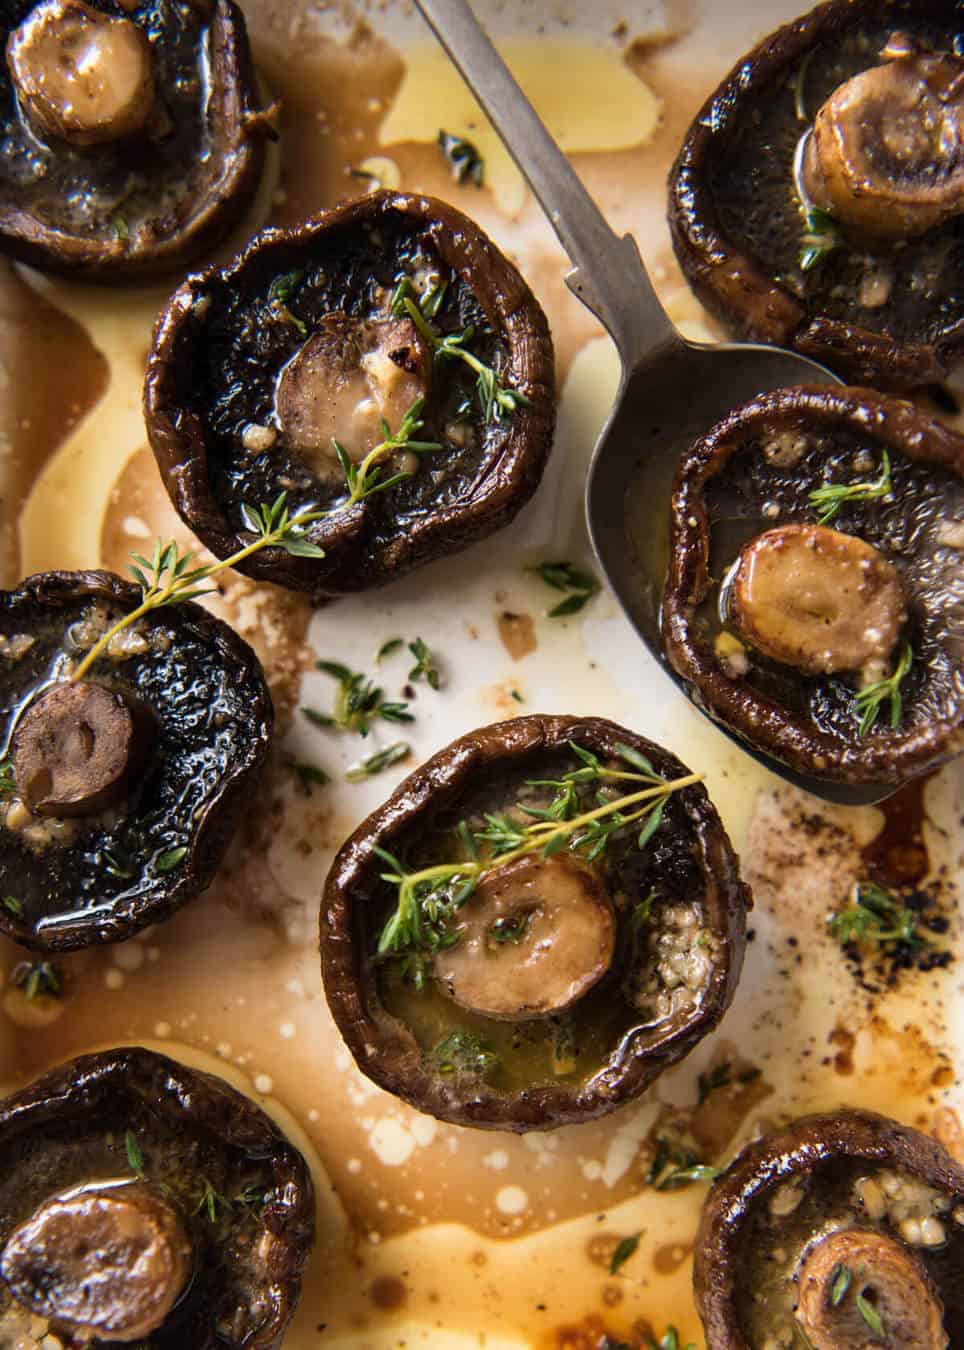 Simple perfection: Garlic Butter Roasted Mushrooms. www.recipetineats.com